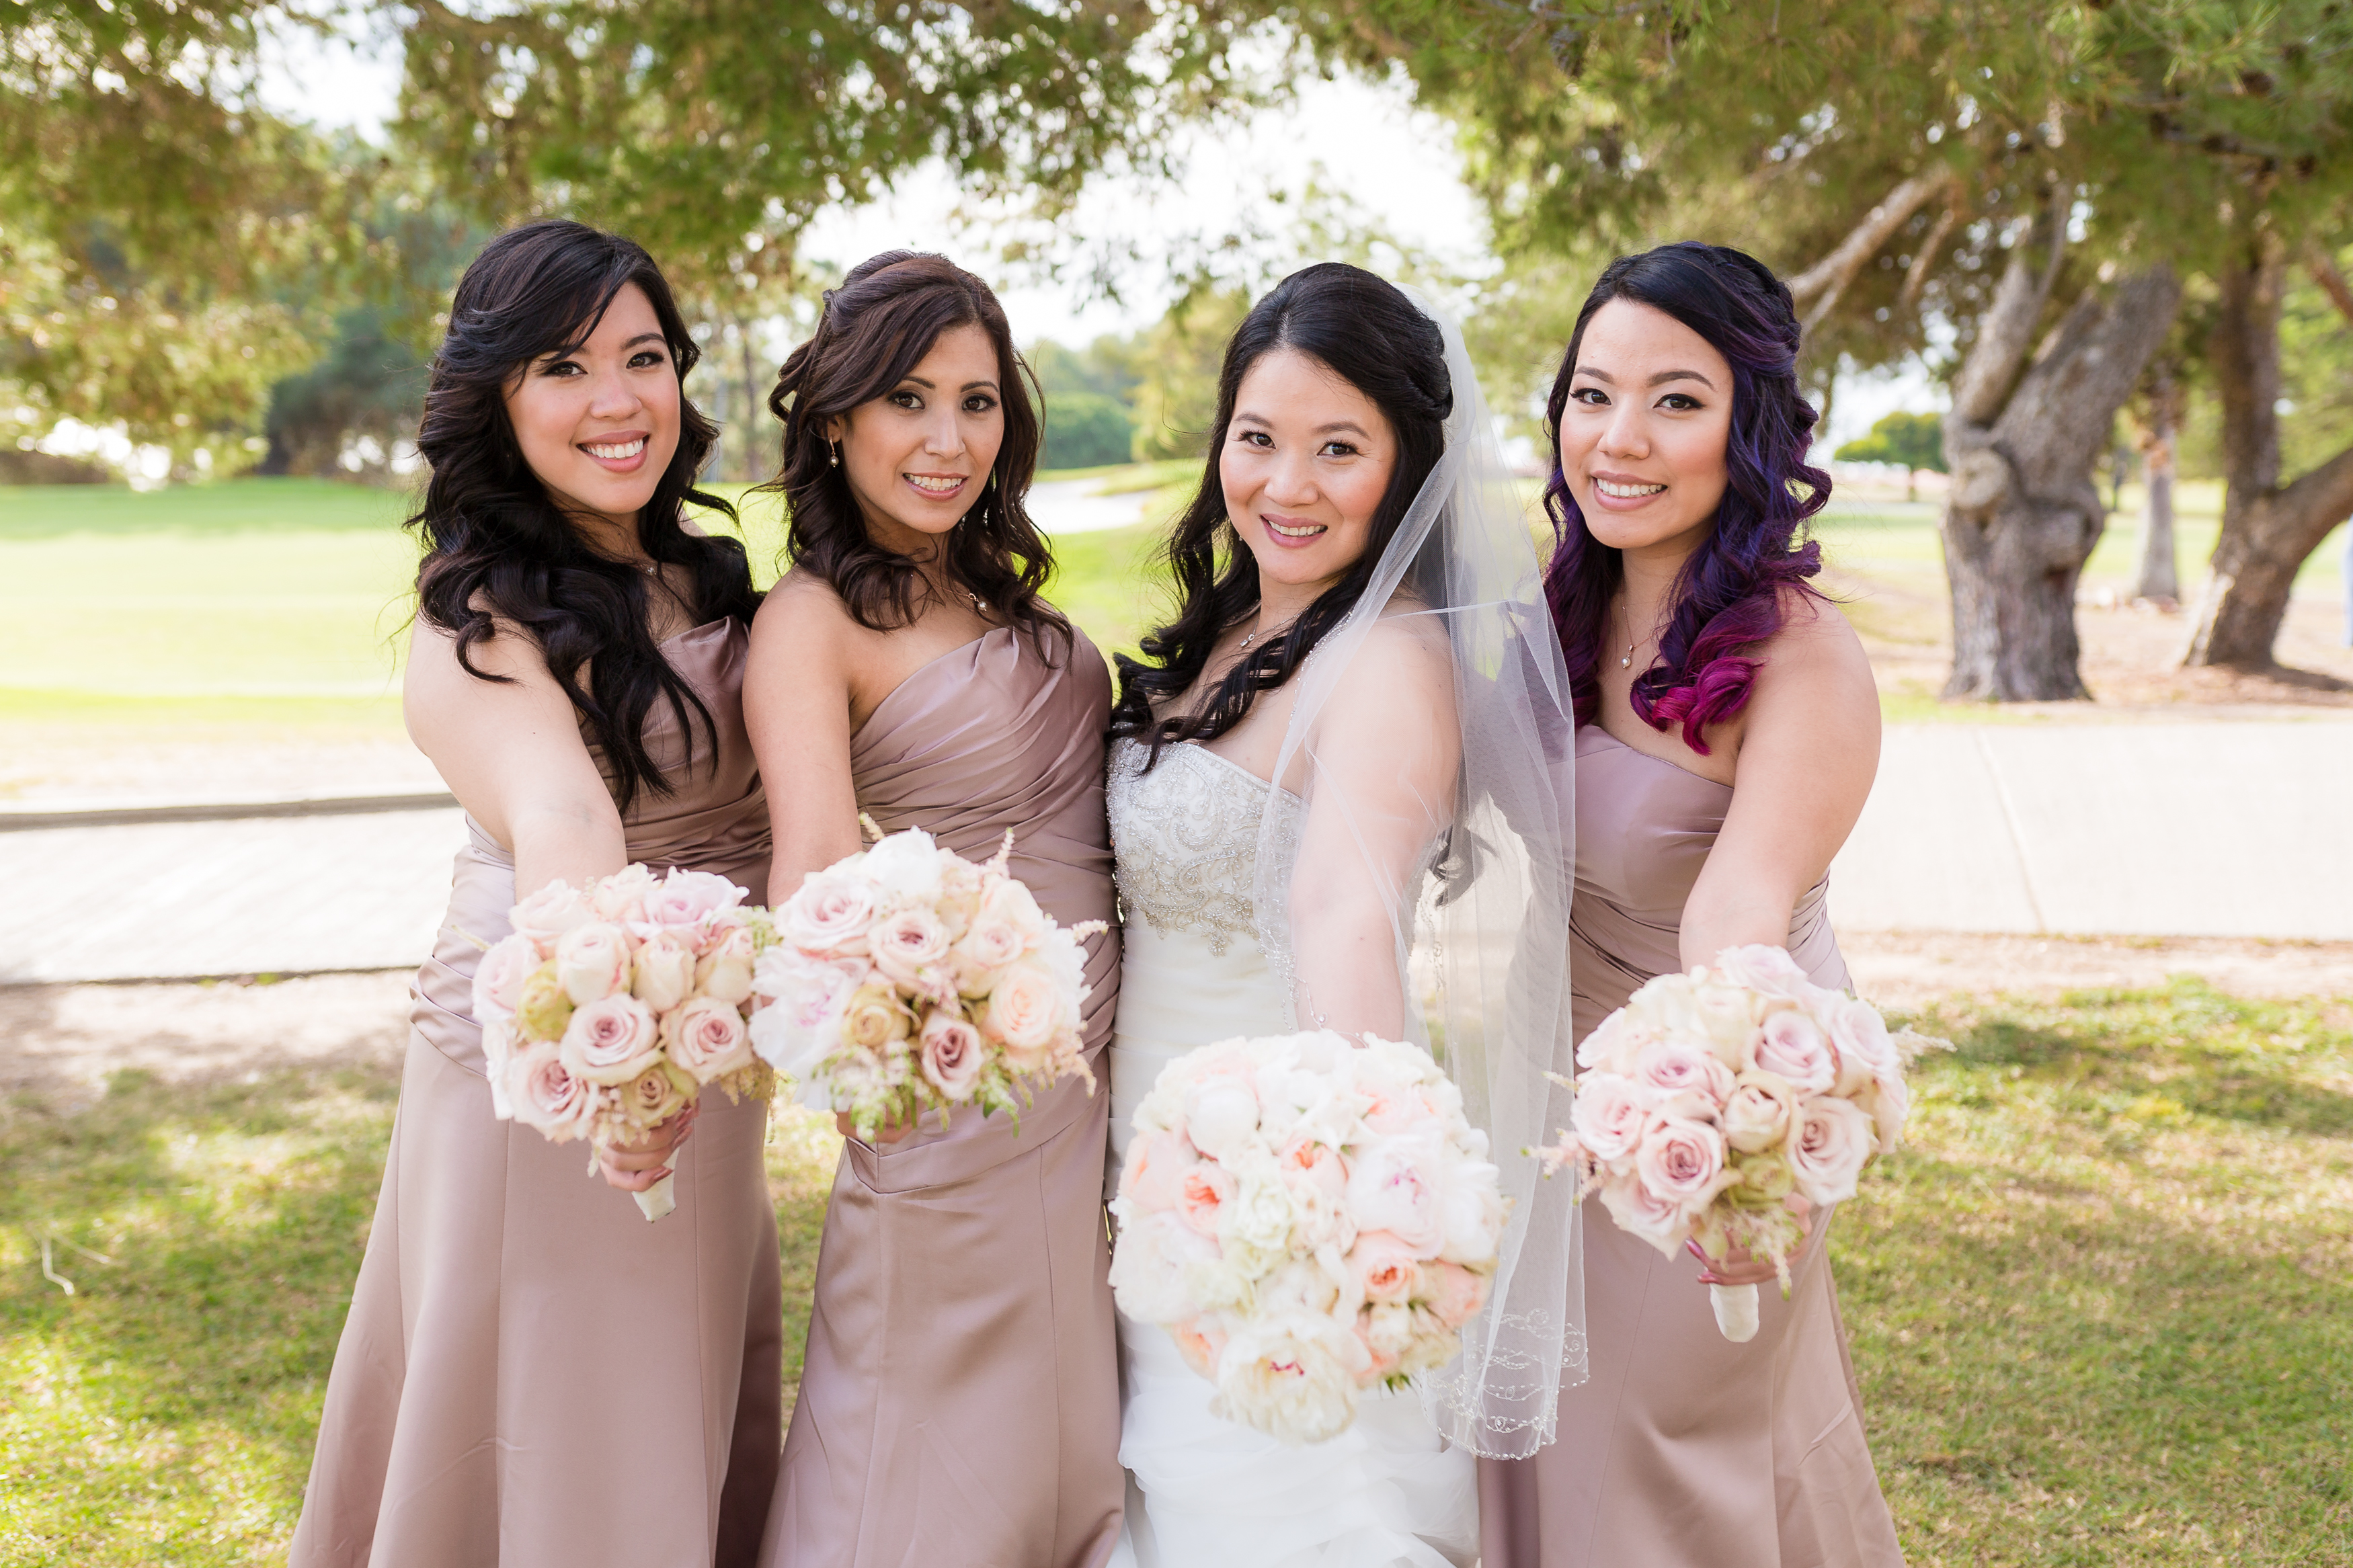 Bride with bridesmaids holding flower bouquets